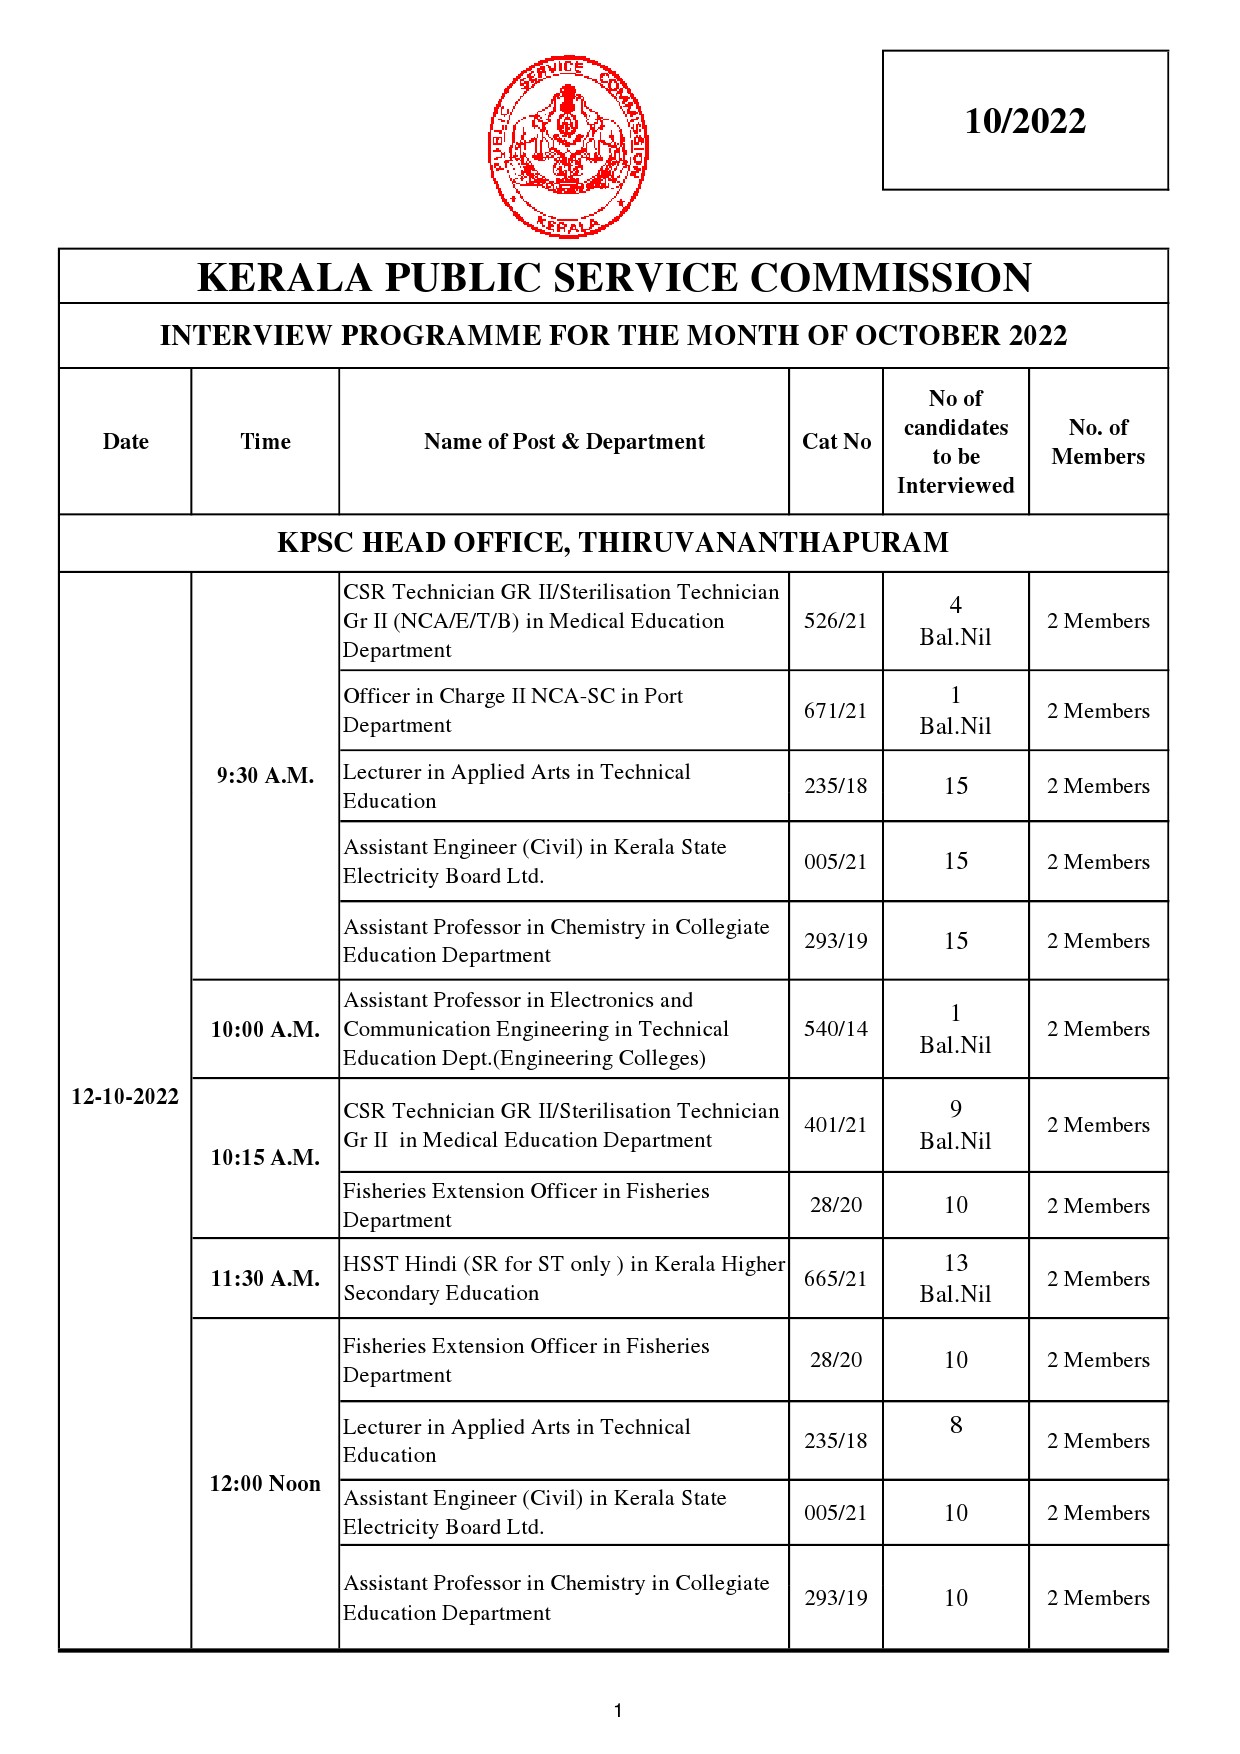 INTERVIEW PROGRAMME FOR THE MONTH OF OCTOBER 2022 - Notification Image 1